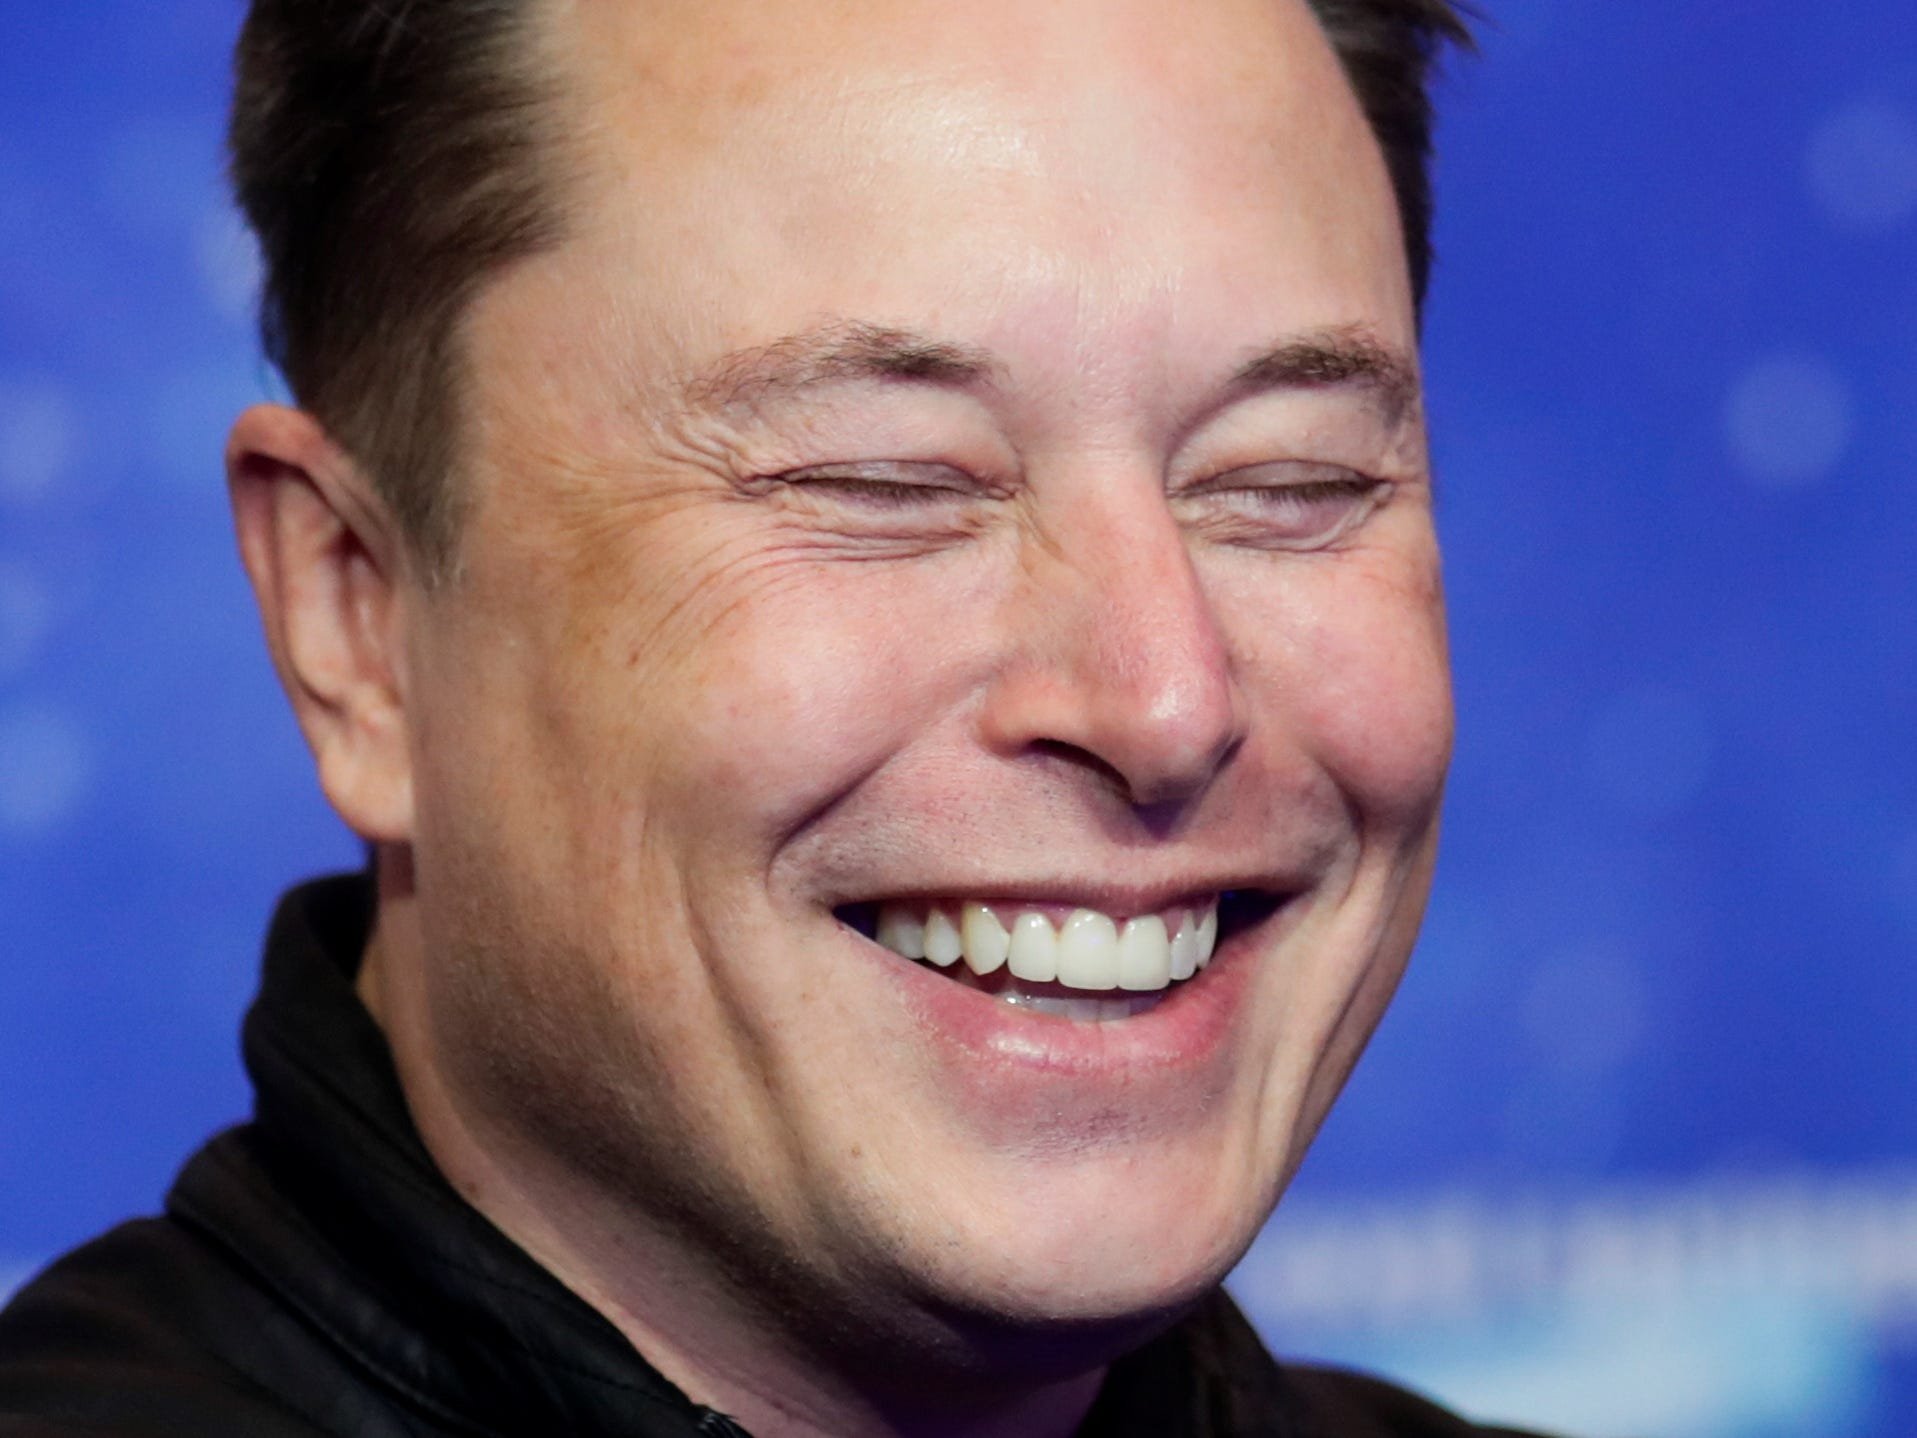 Elon Musk appeared to threaten Twitter with selling his 9.2% stake in the company if it doesn't accept his audacious $43 billion takeover offer